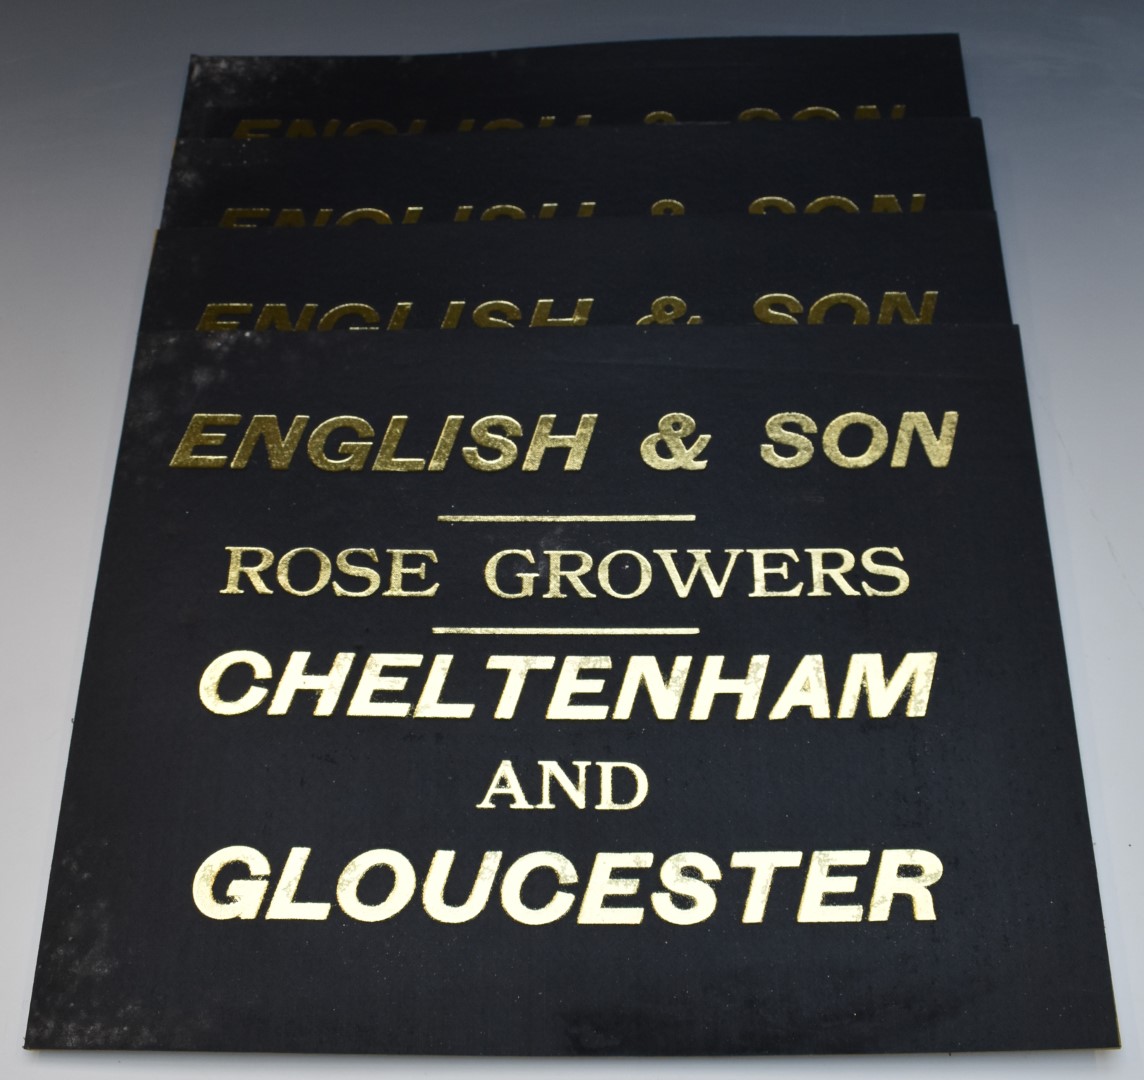 Vintage cardboard/pressed board signage including English and Son Rose Growers Gloucester and - Image 10 of 11